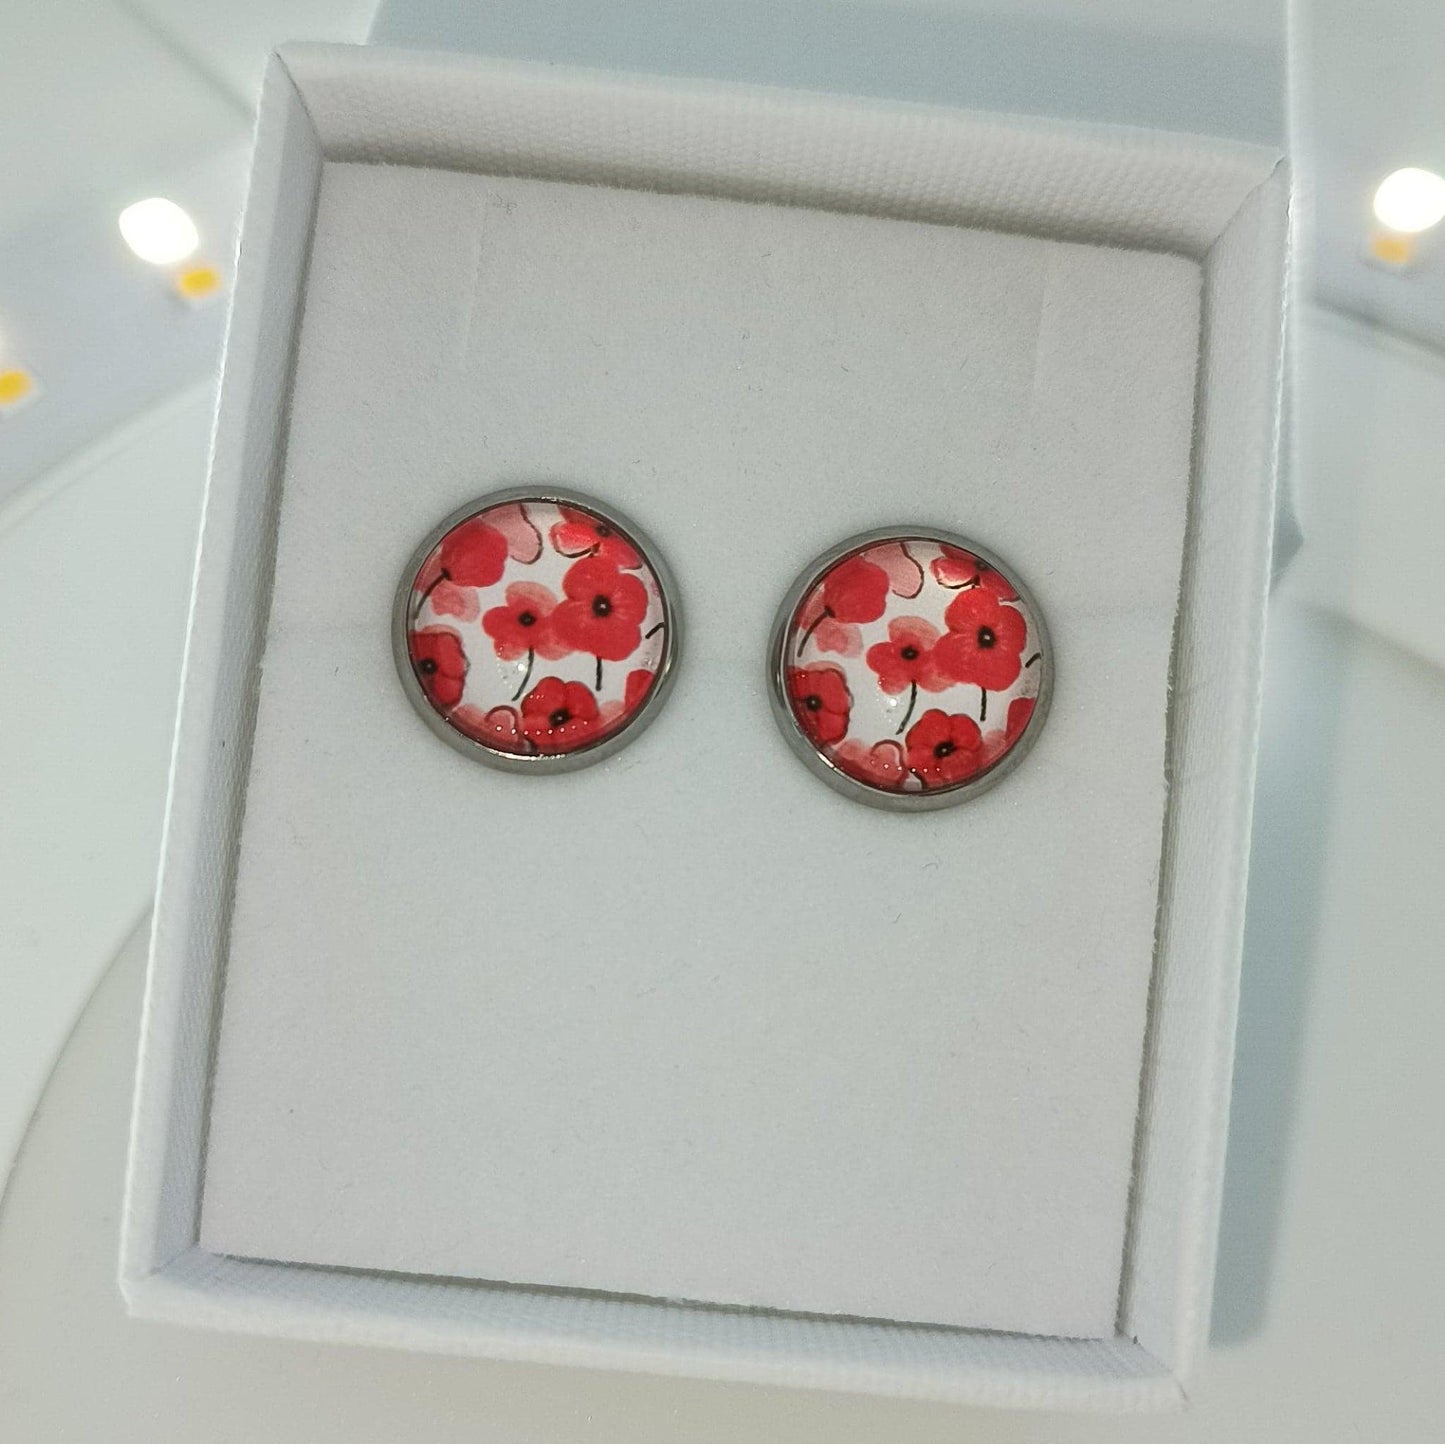 Earrings built to perfection - pretty red poppy stud earrings, Cabochon earrings, Cabochon 12mm, Glass cabochon earrings - Lil-aiges Creations - Quality Australian-made Gifts